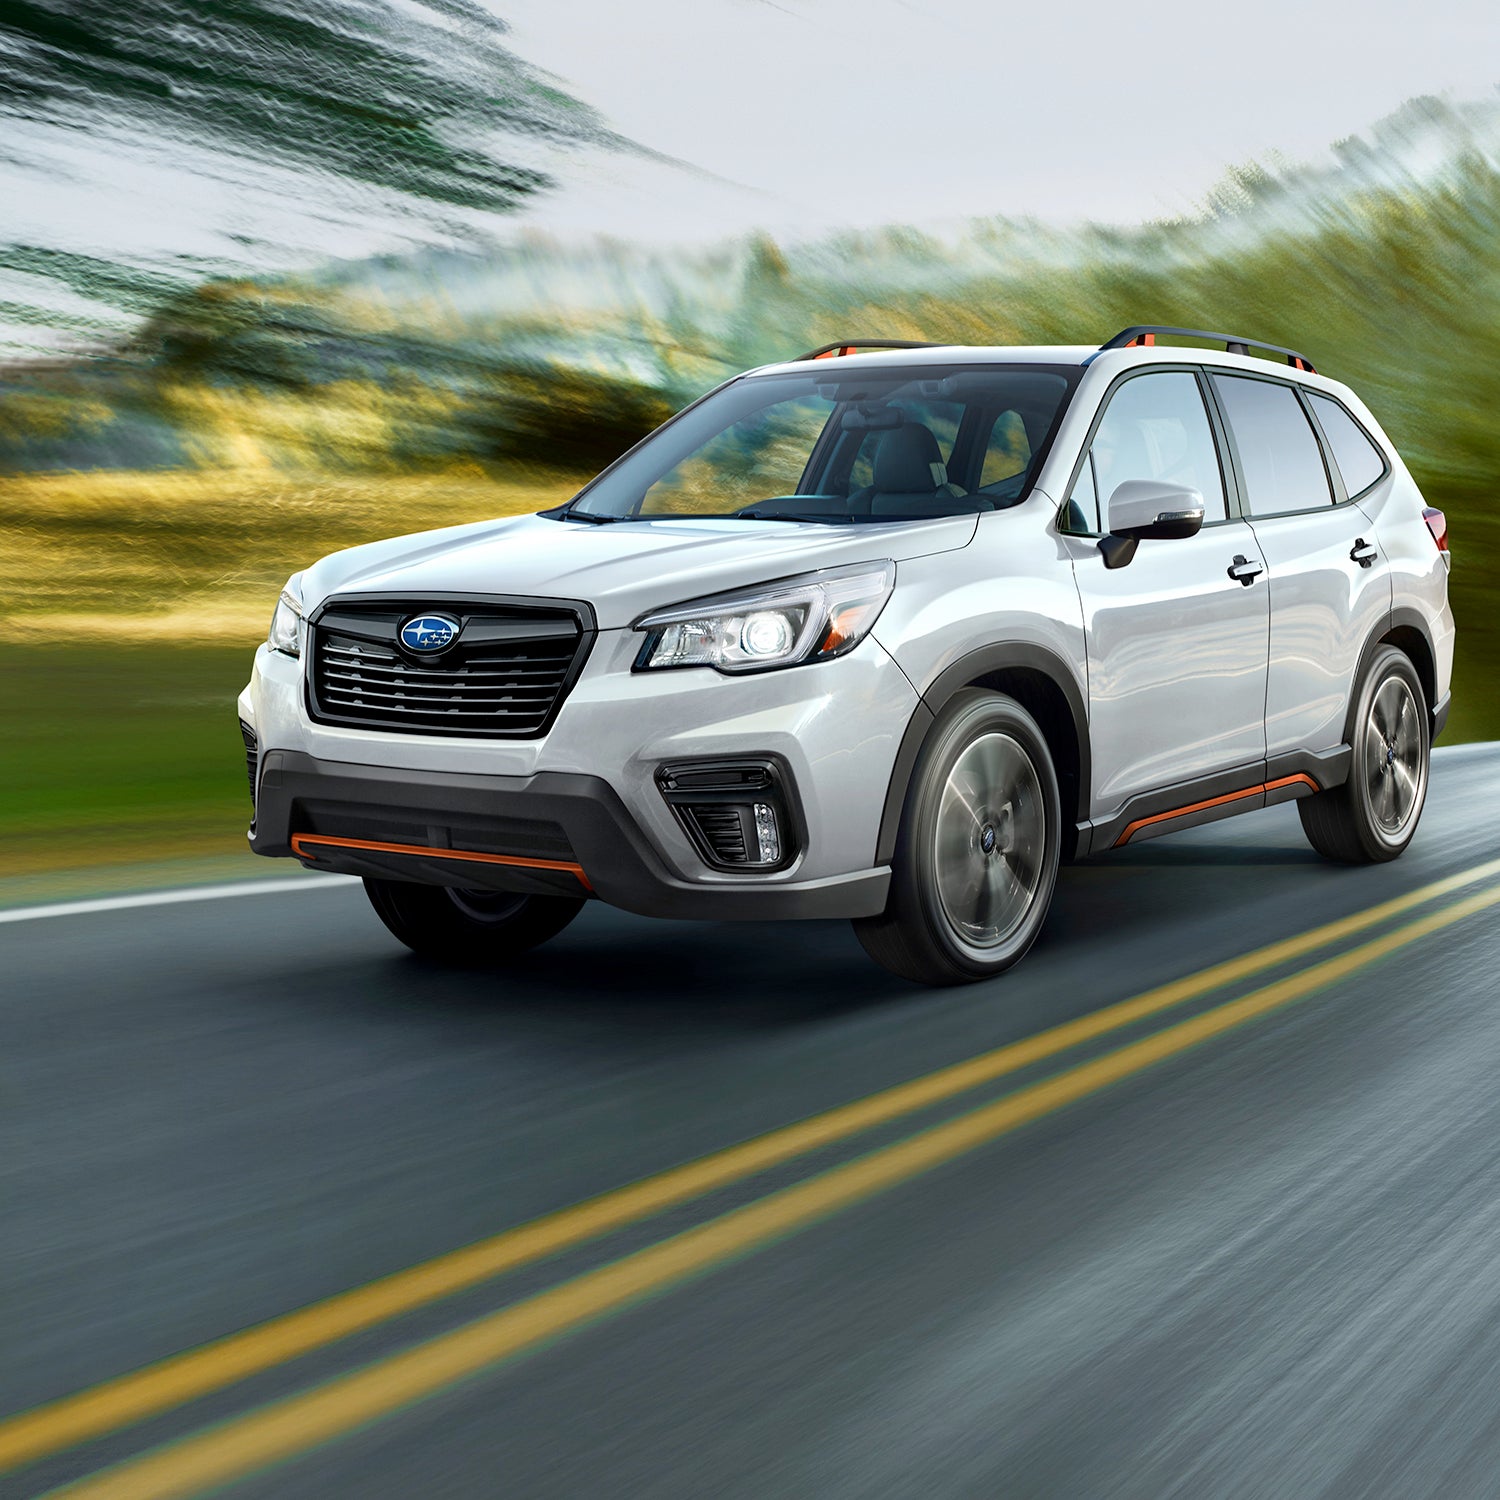 The New Subaru Forester Gets Better in Almost Every Way